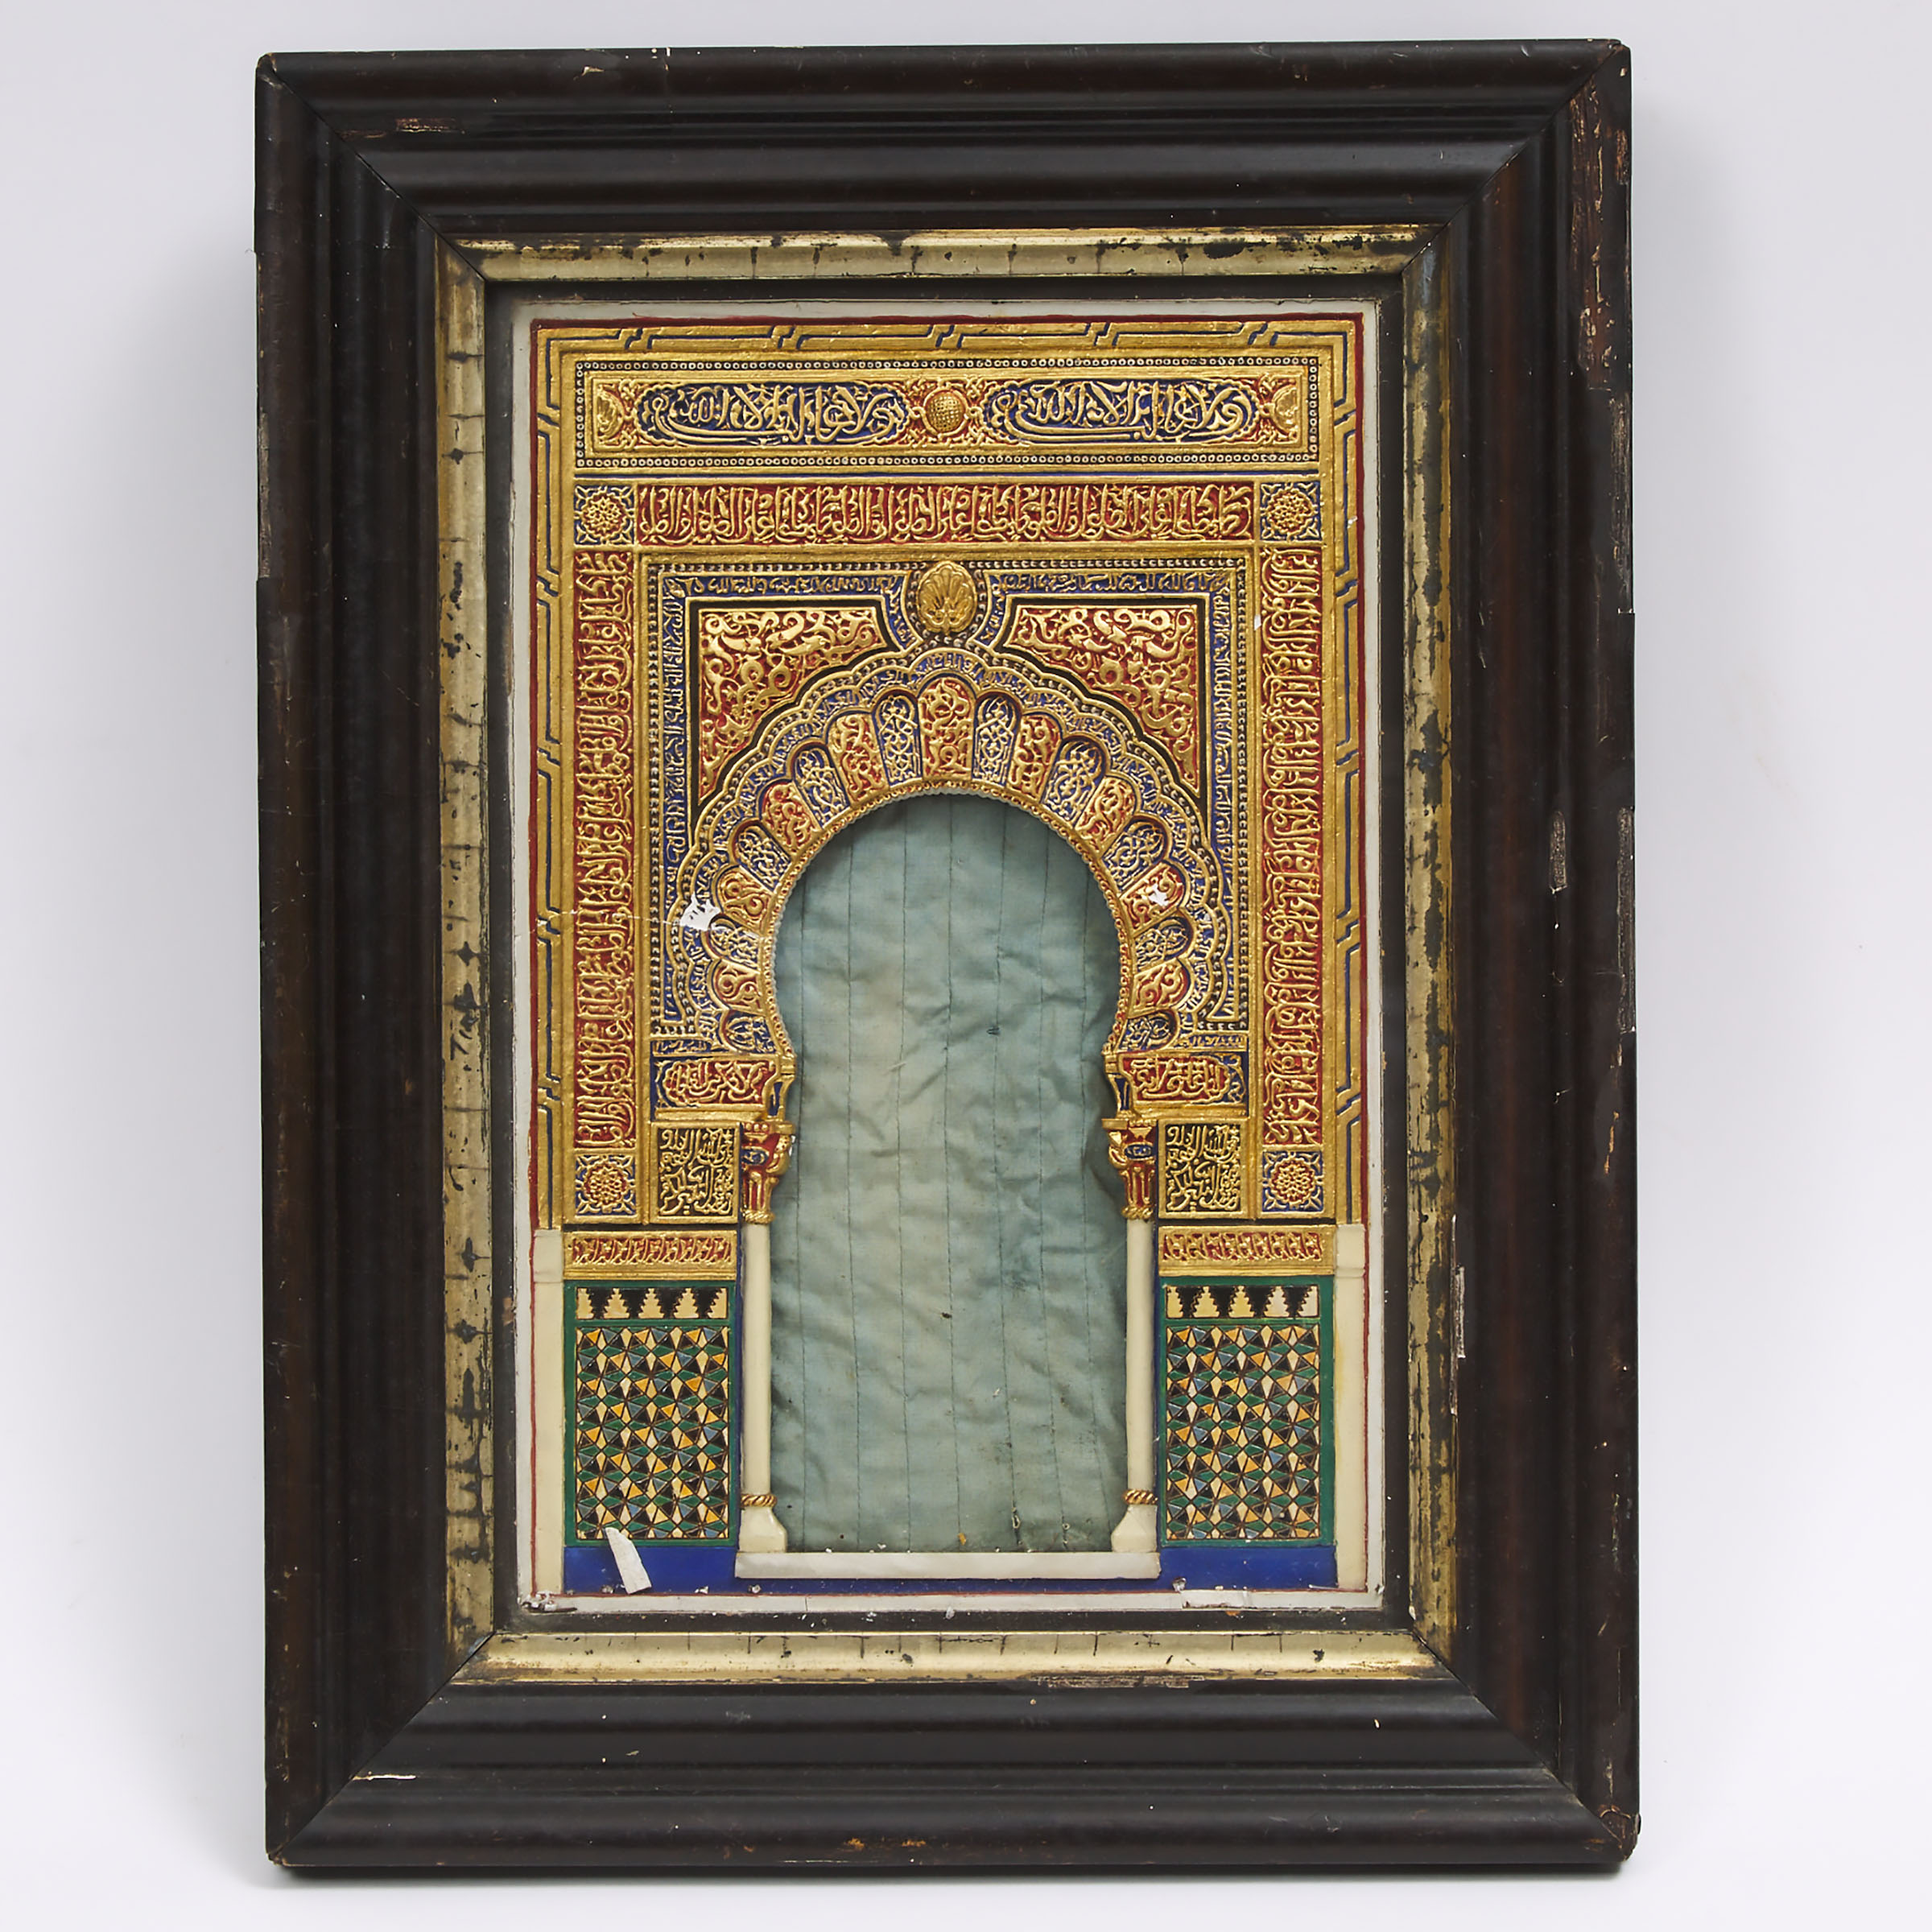 Painted Gesso Alhambra Palace Mihrab Plaque Granada, Spain, mid 19th century